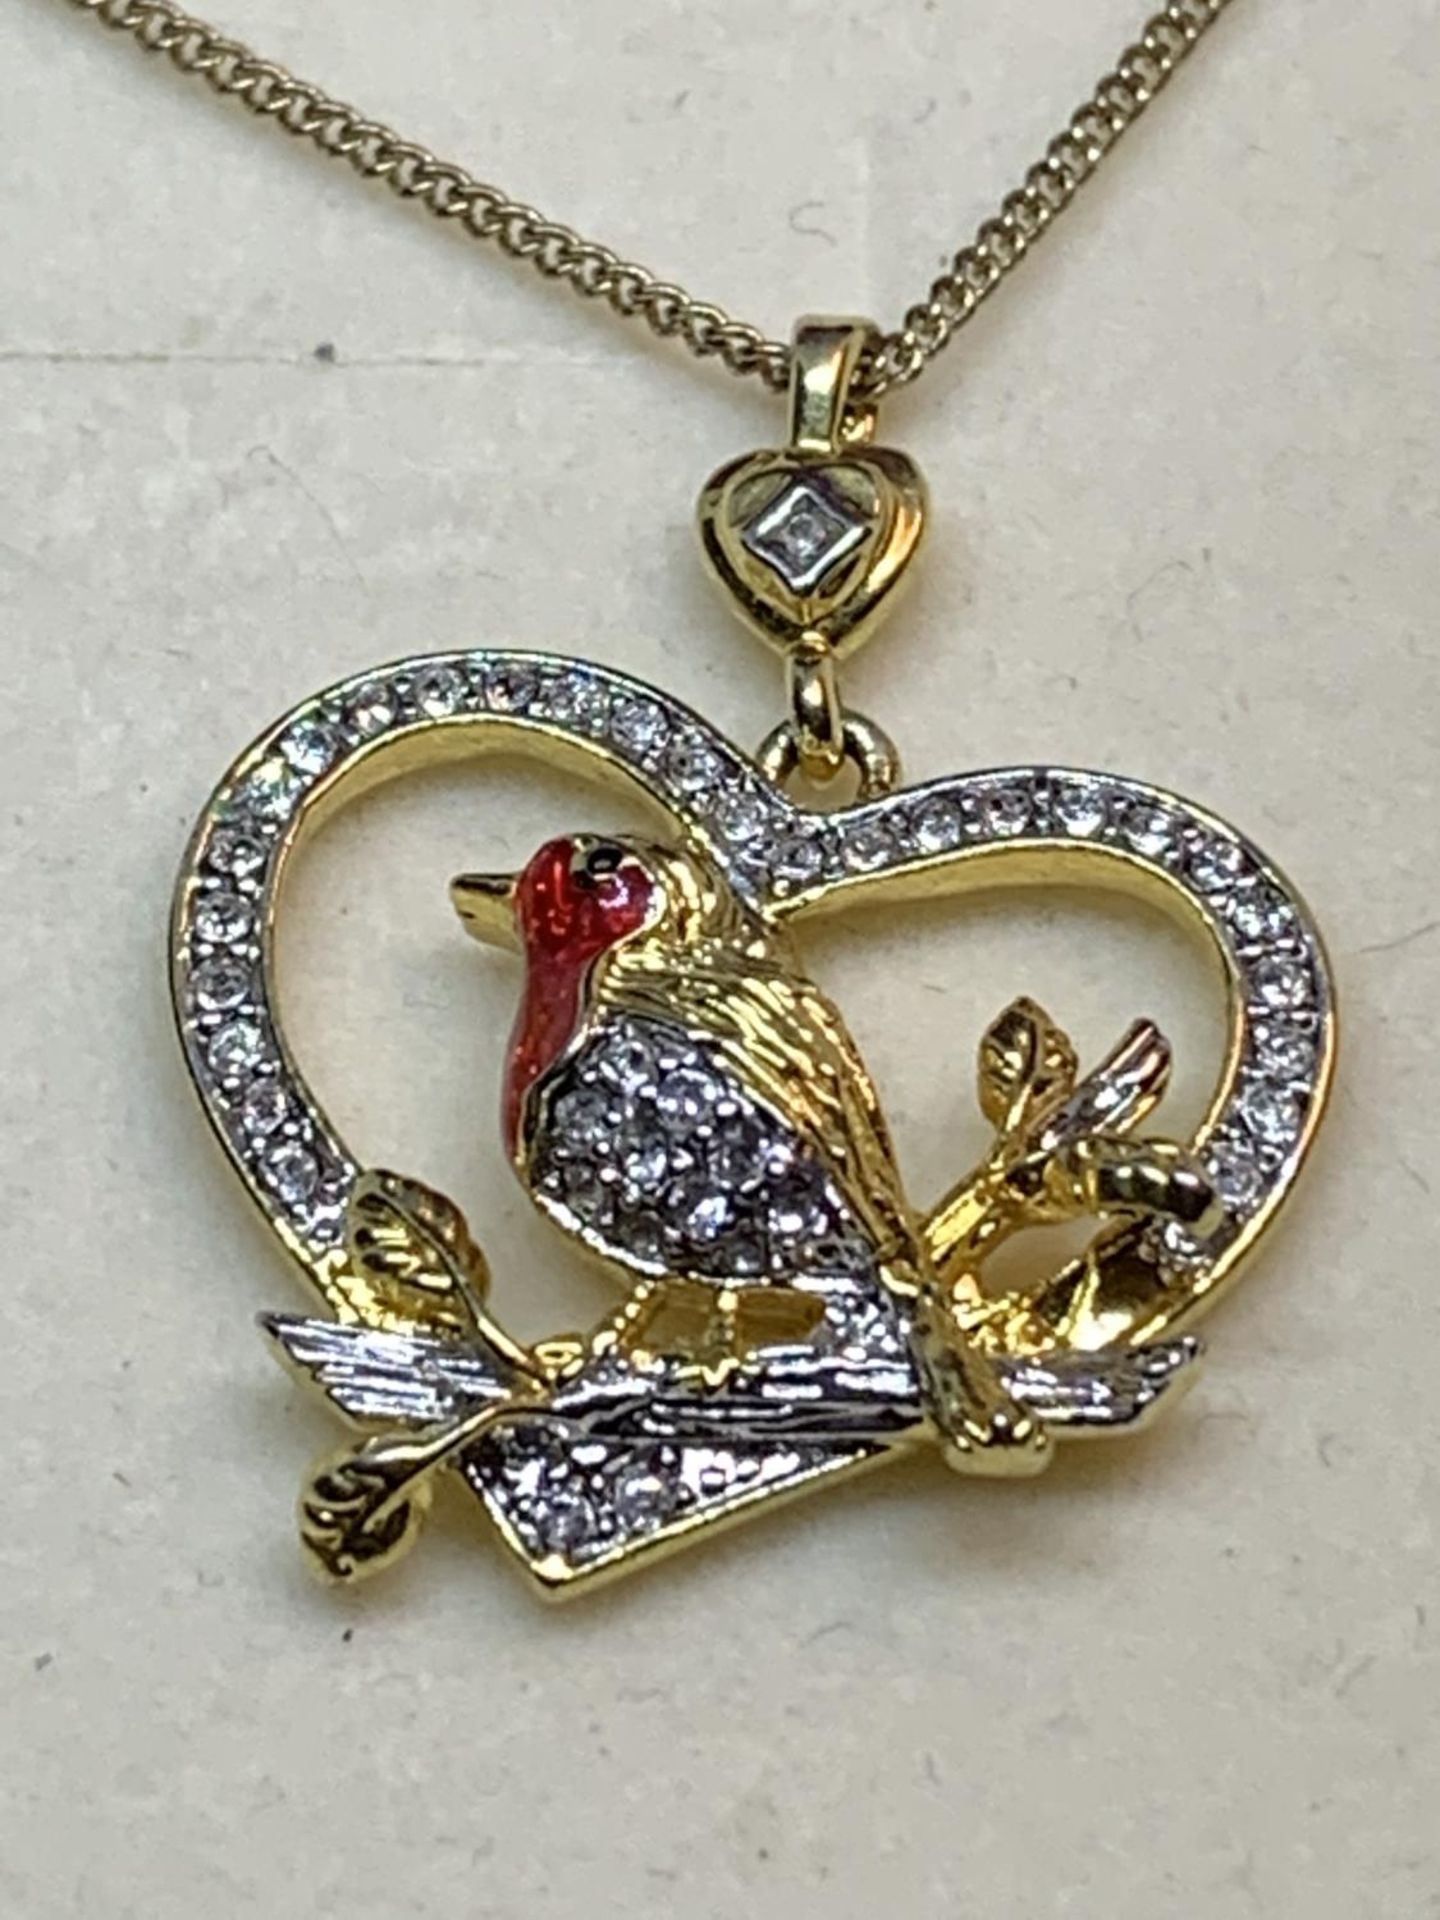 A NECKLACE WITH A CRYSTAL ROBIN PENDANT IN A PRESENTATION BOX - Image 2 of 3